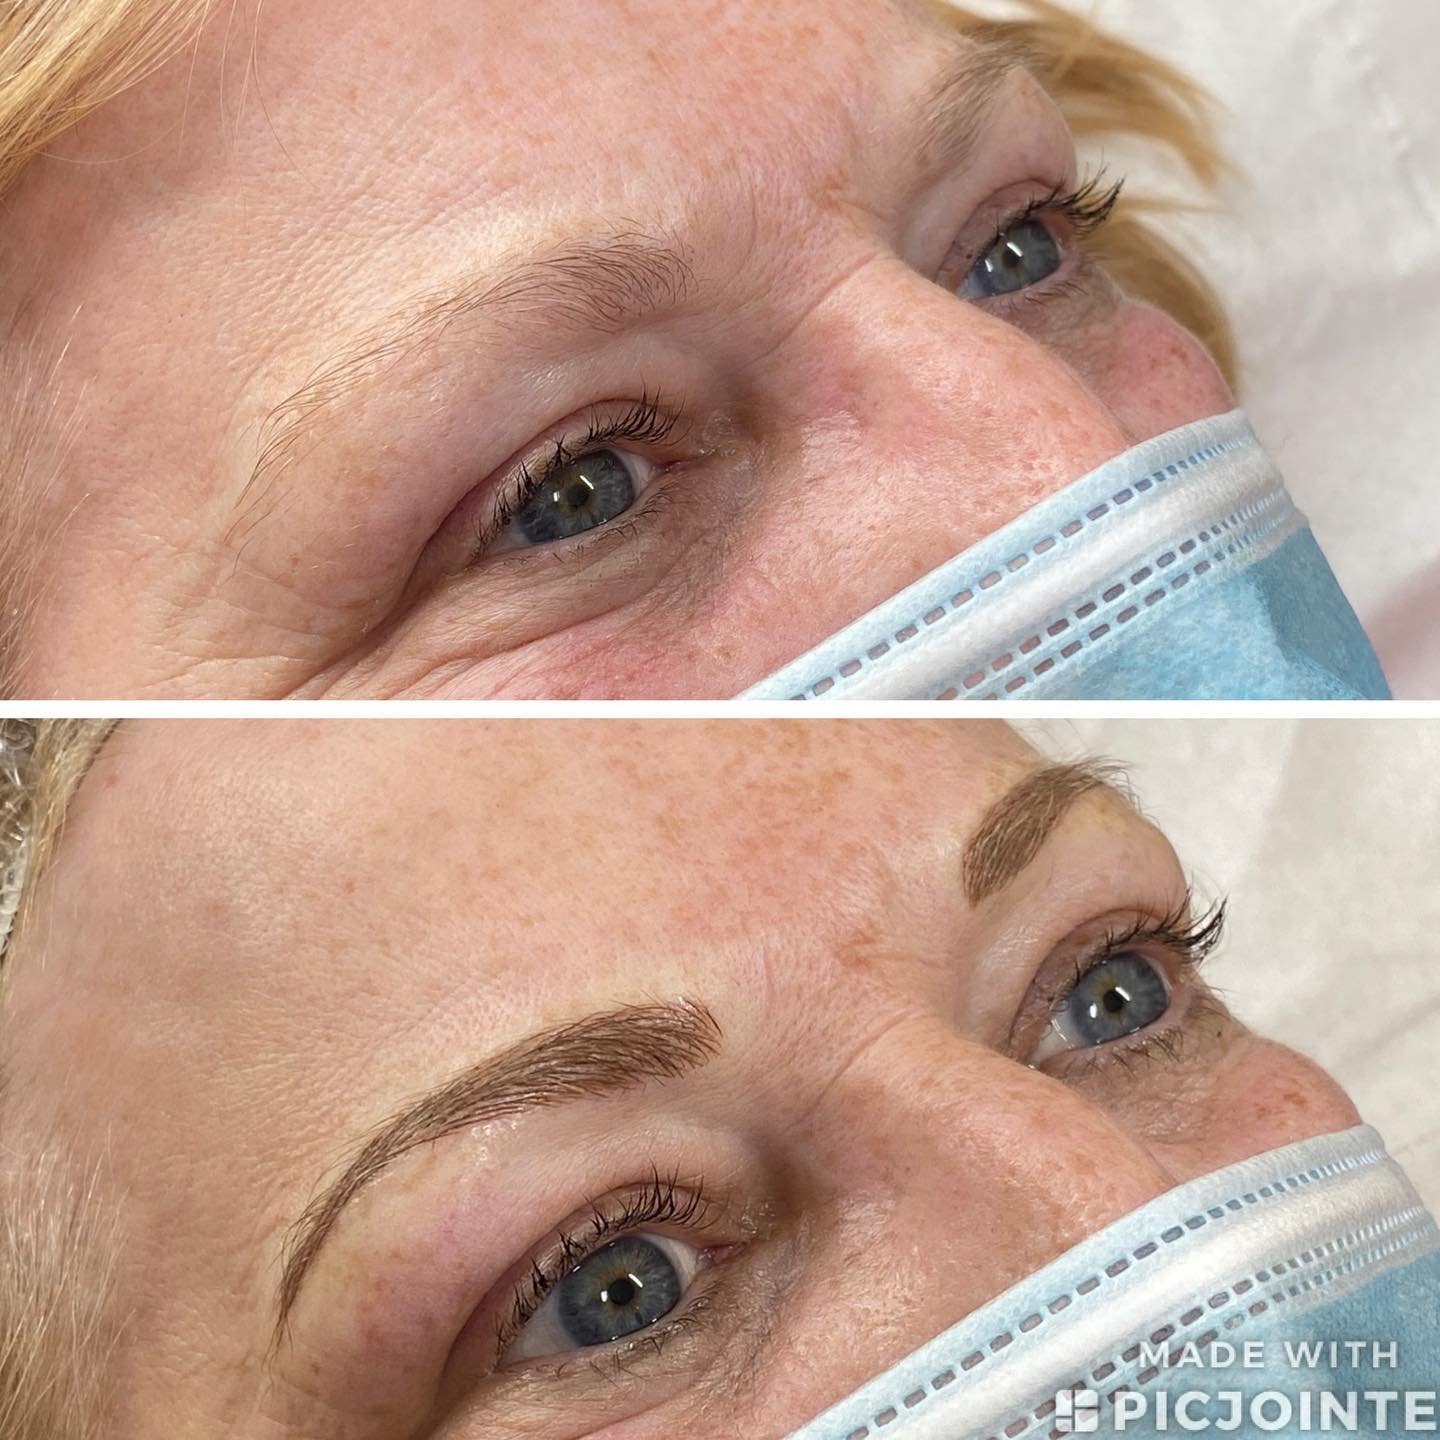 These new brows will heal to a lovely soft blonde. #microblading #microbladingeyebrows #microbladingjerseyci #semipermanentmakeup #naturalbrows #hairstrokebrows